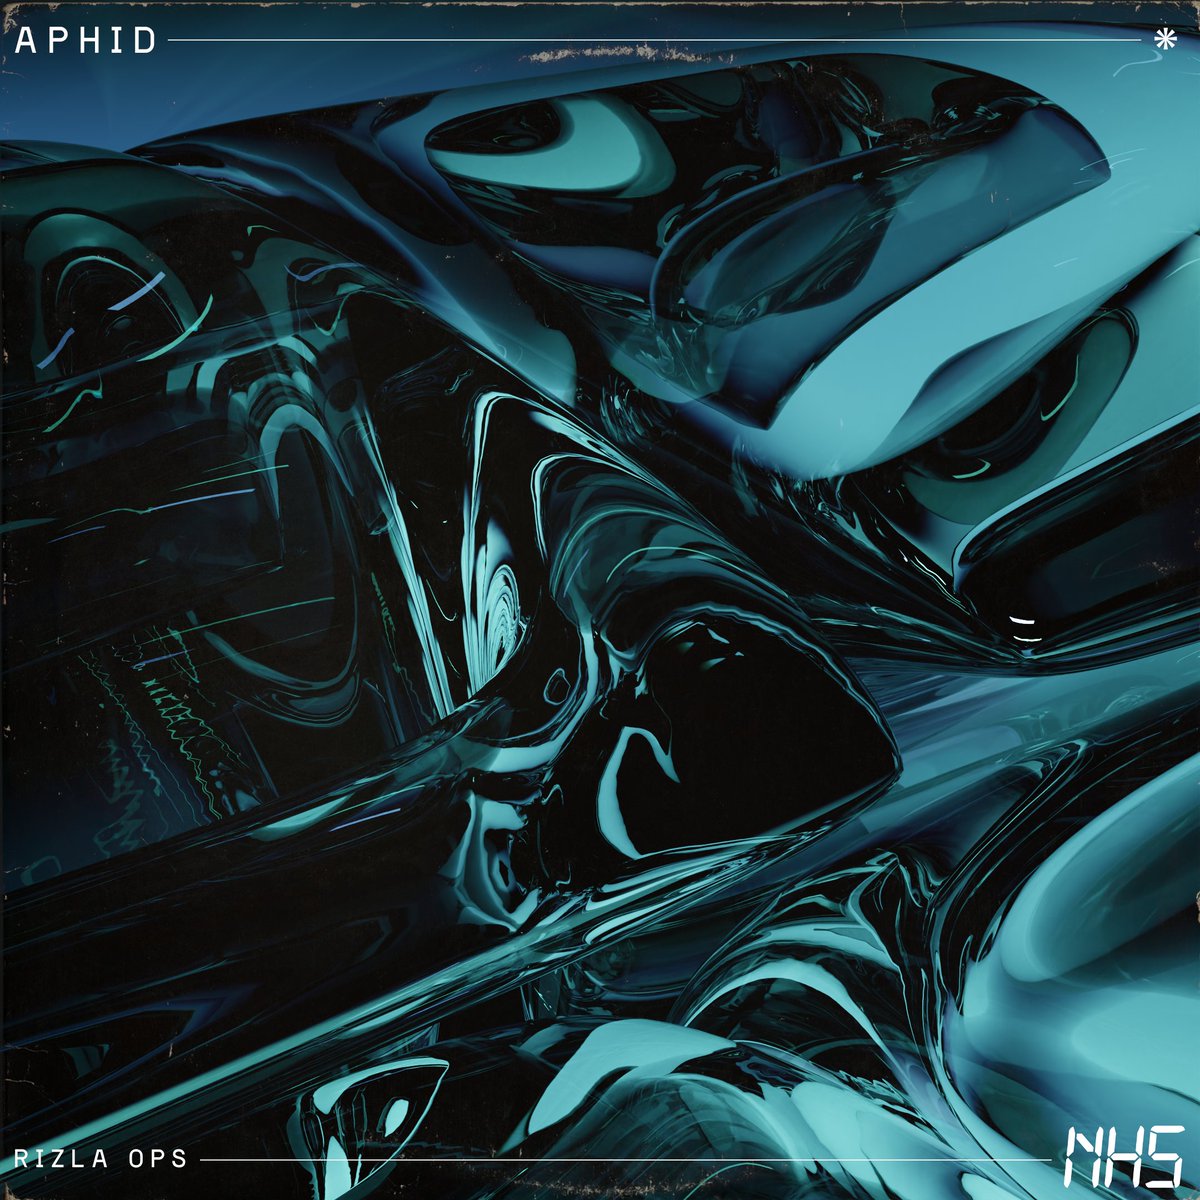 NHS026 - @rizlaops - Aphid | Out Now! Remix from #somaticrittuals affiliate #mafou Mastered by Fausto Mercier Artwork by @AntidotePsd on.soundcloud.com/YM7NHLVr8a3wcj…